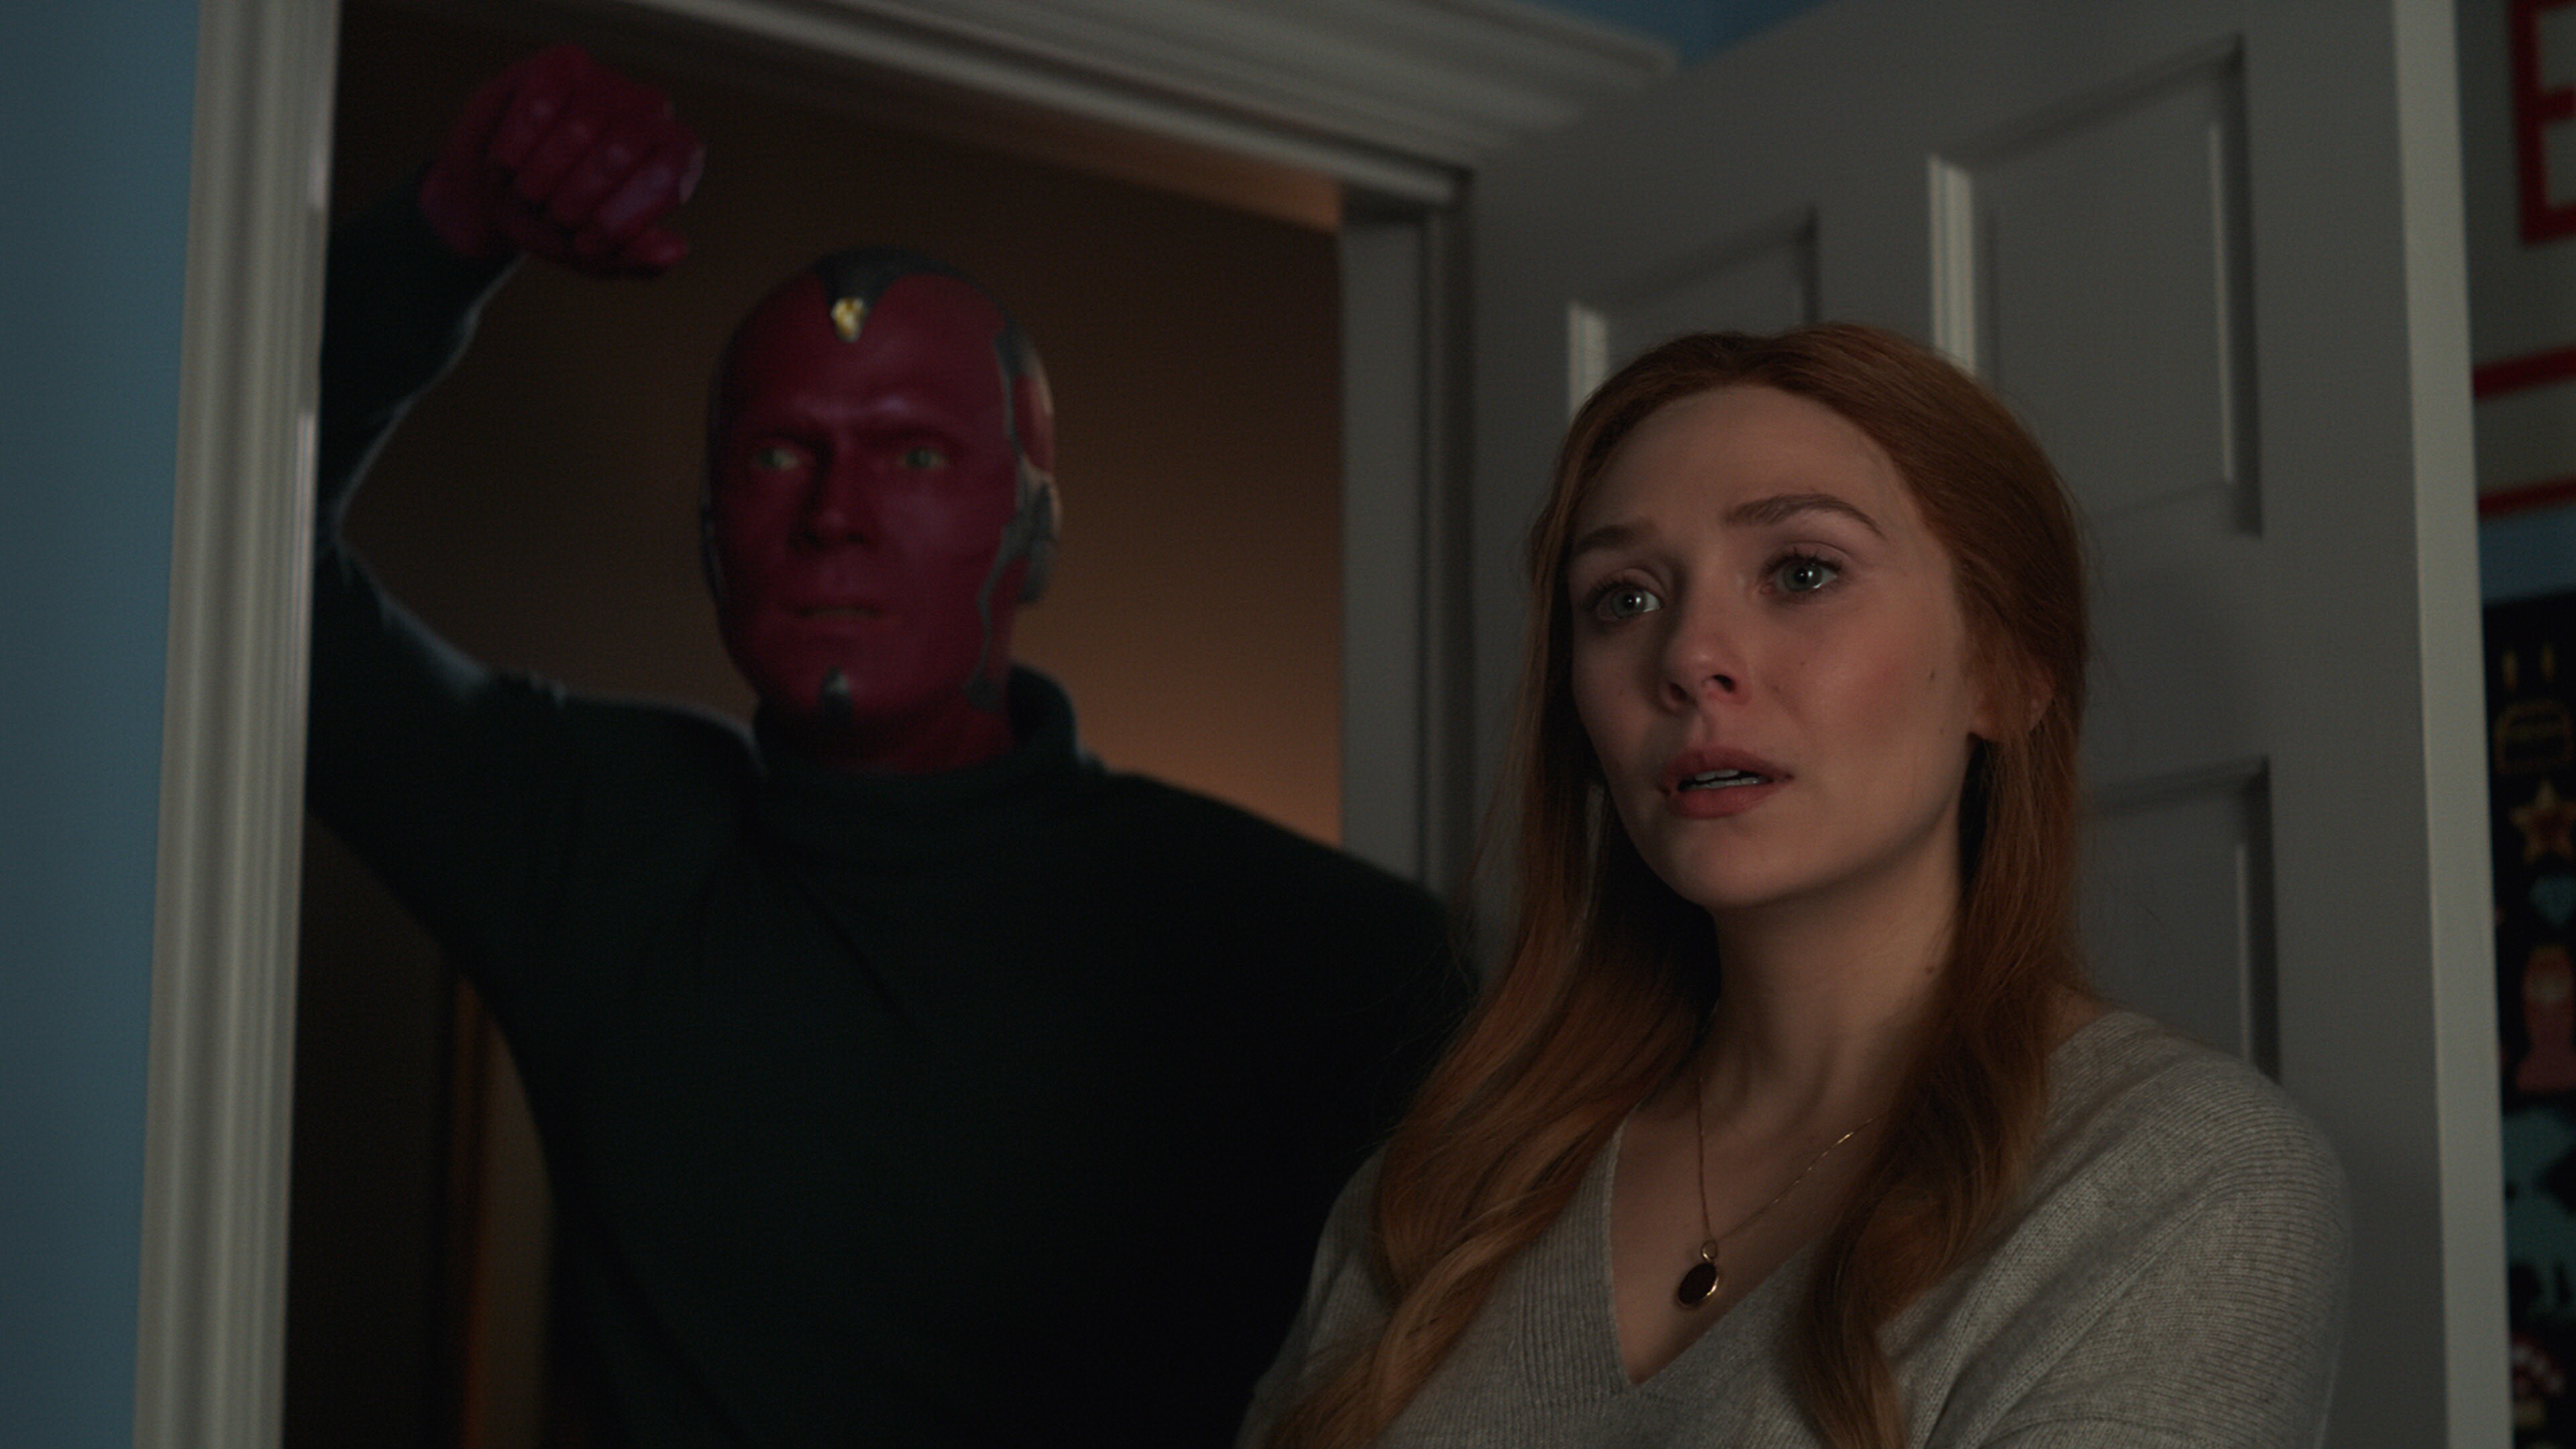 Getting To Know Wanda & Vision: A Comprehensive Comic List - Skywalking  Network